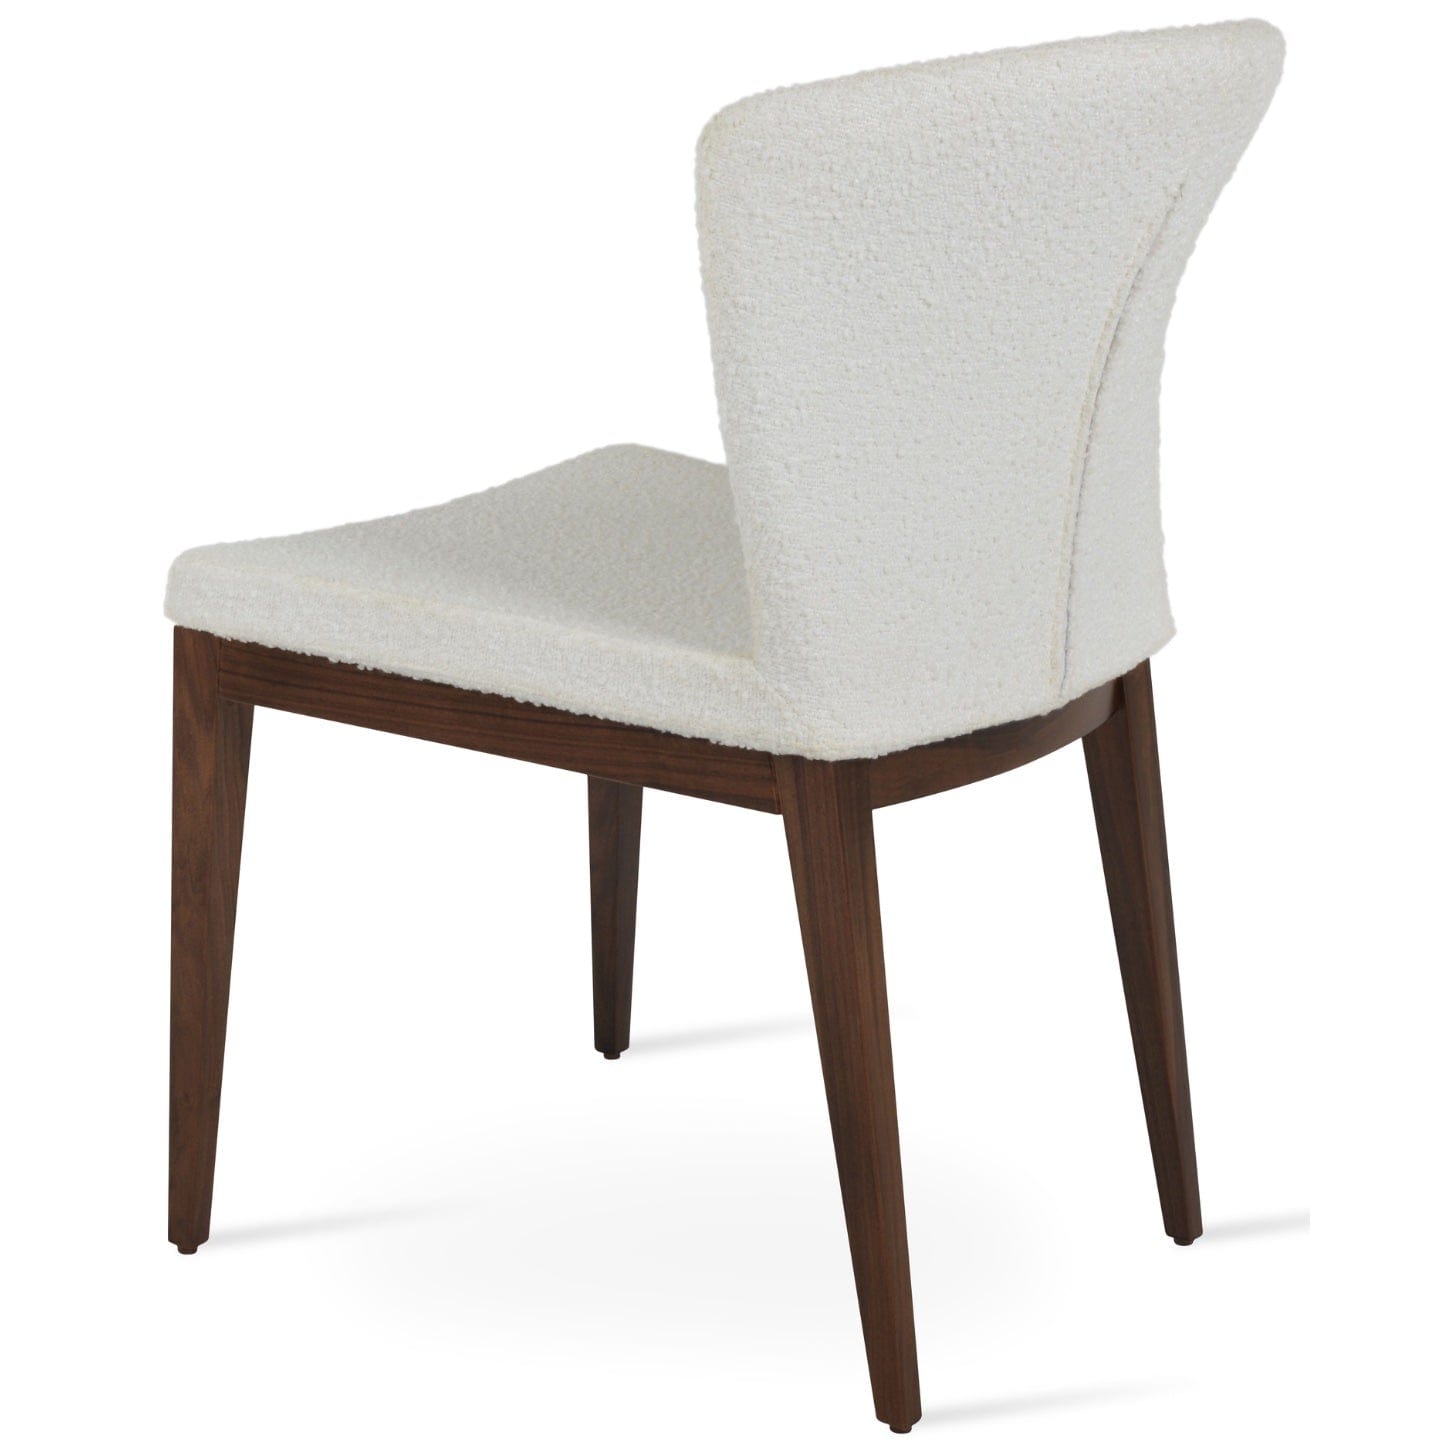 sohoConcept Kitchen & Dining Room Chairs Capri Wood Chairs | Boucle Upholstered Wooden Dining Chairs